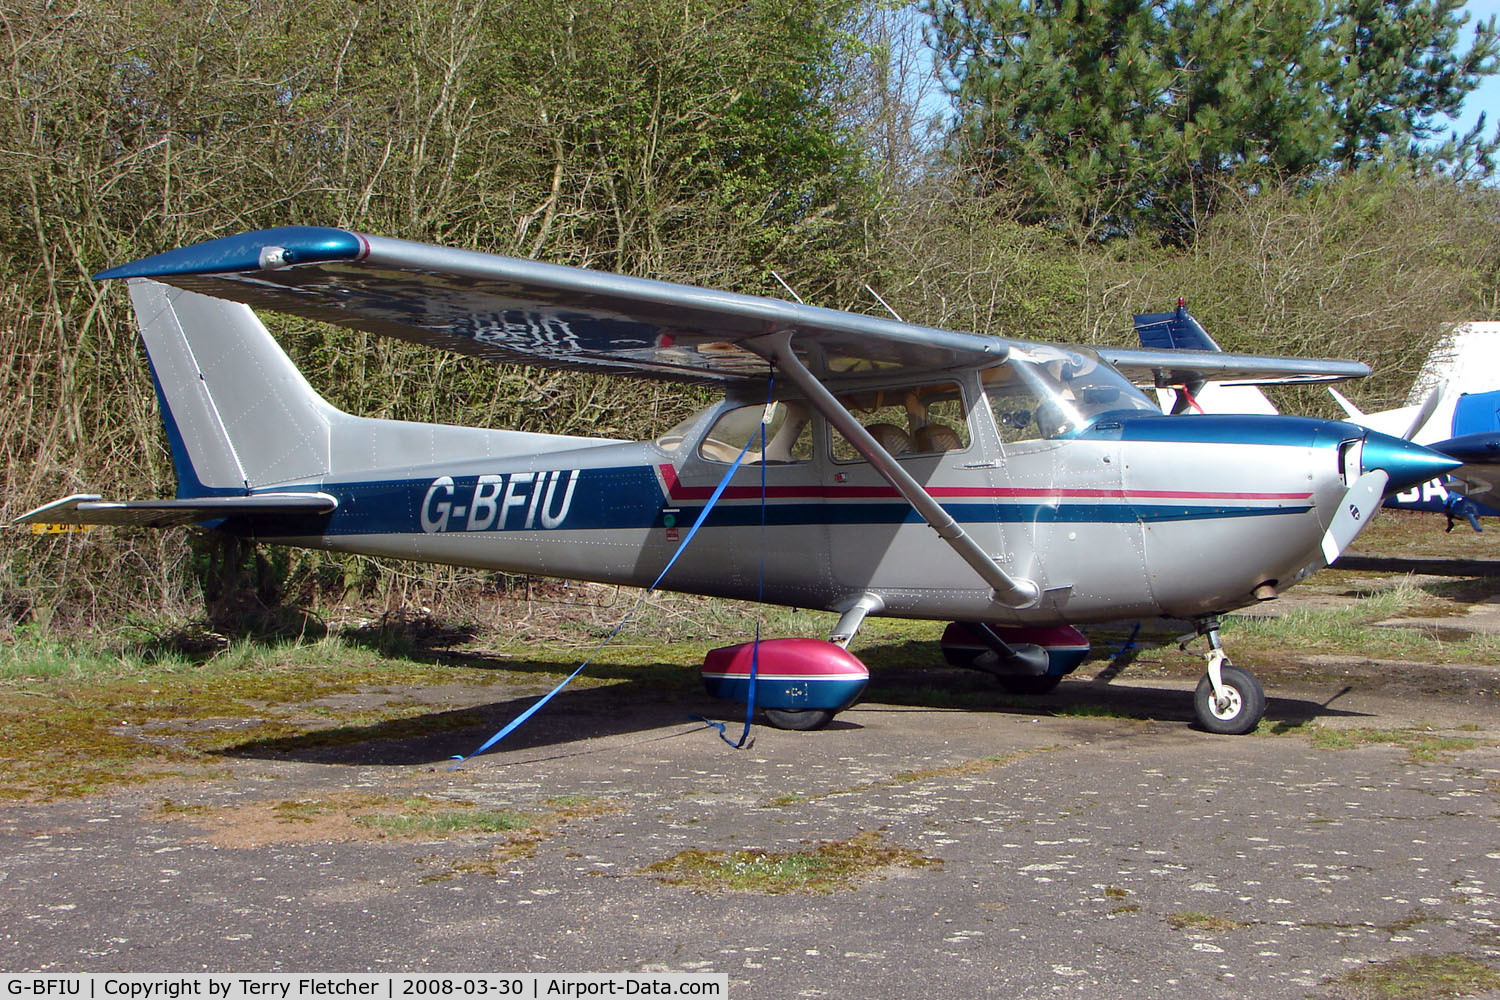 G-BFIU, 1977 Reims FR172K Hawk XP C/N FR172-00591, Based aircraft at the quaintly named Hinton-in-the-Hedges airfield